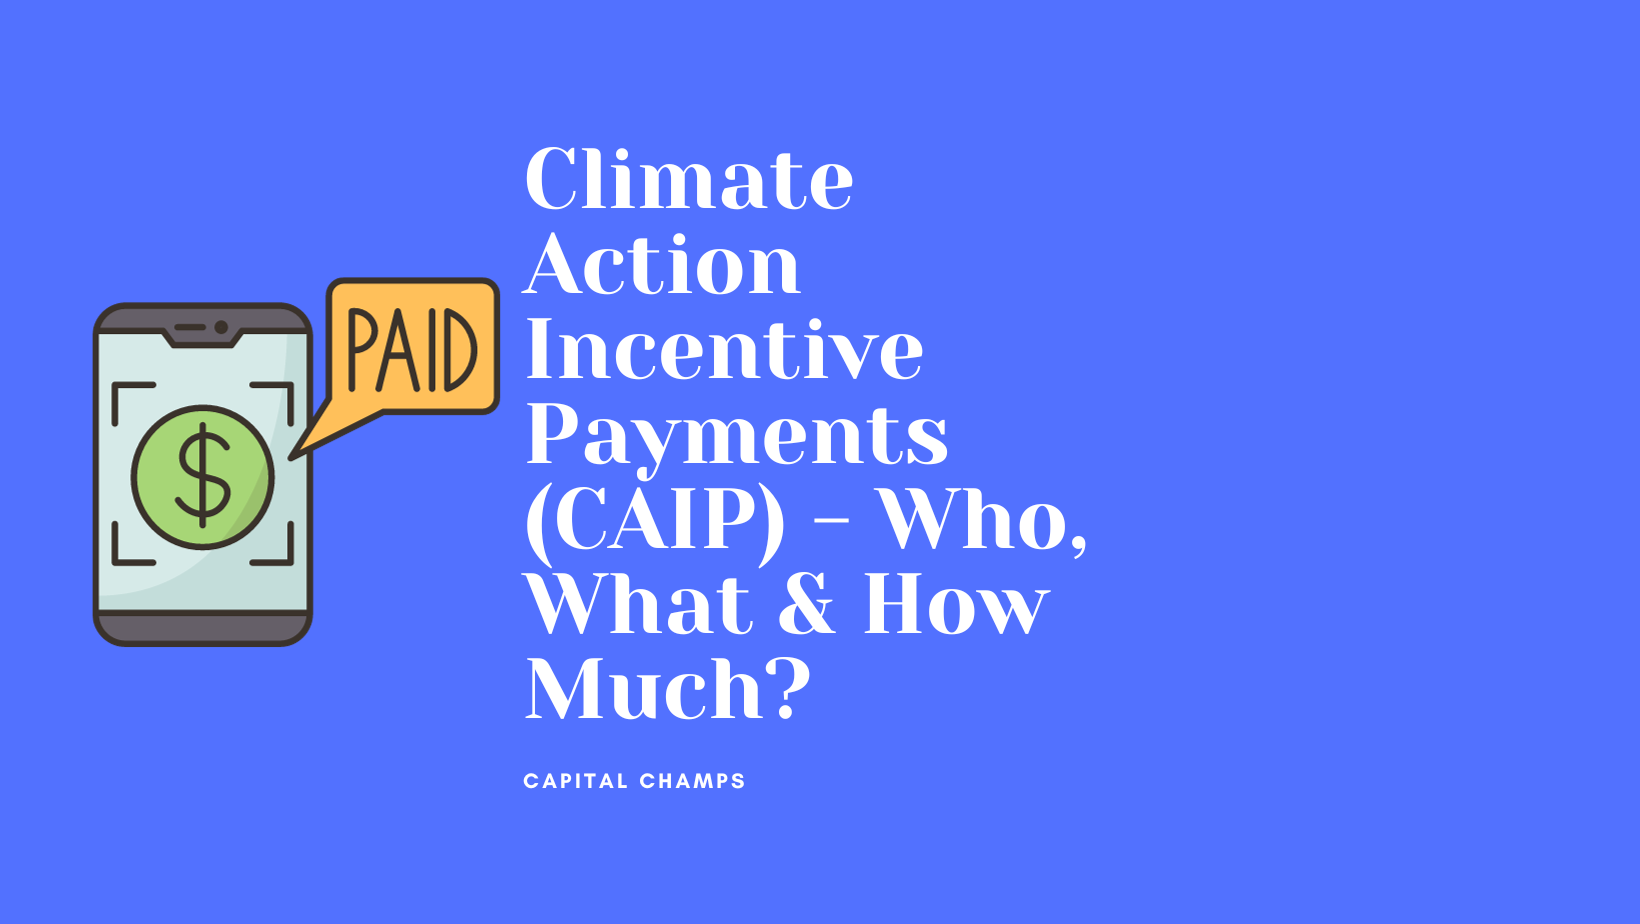 Climate Action Incentive Payments (CAIP) - Who, What & How Much